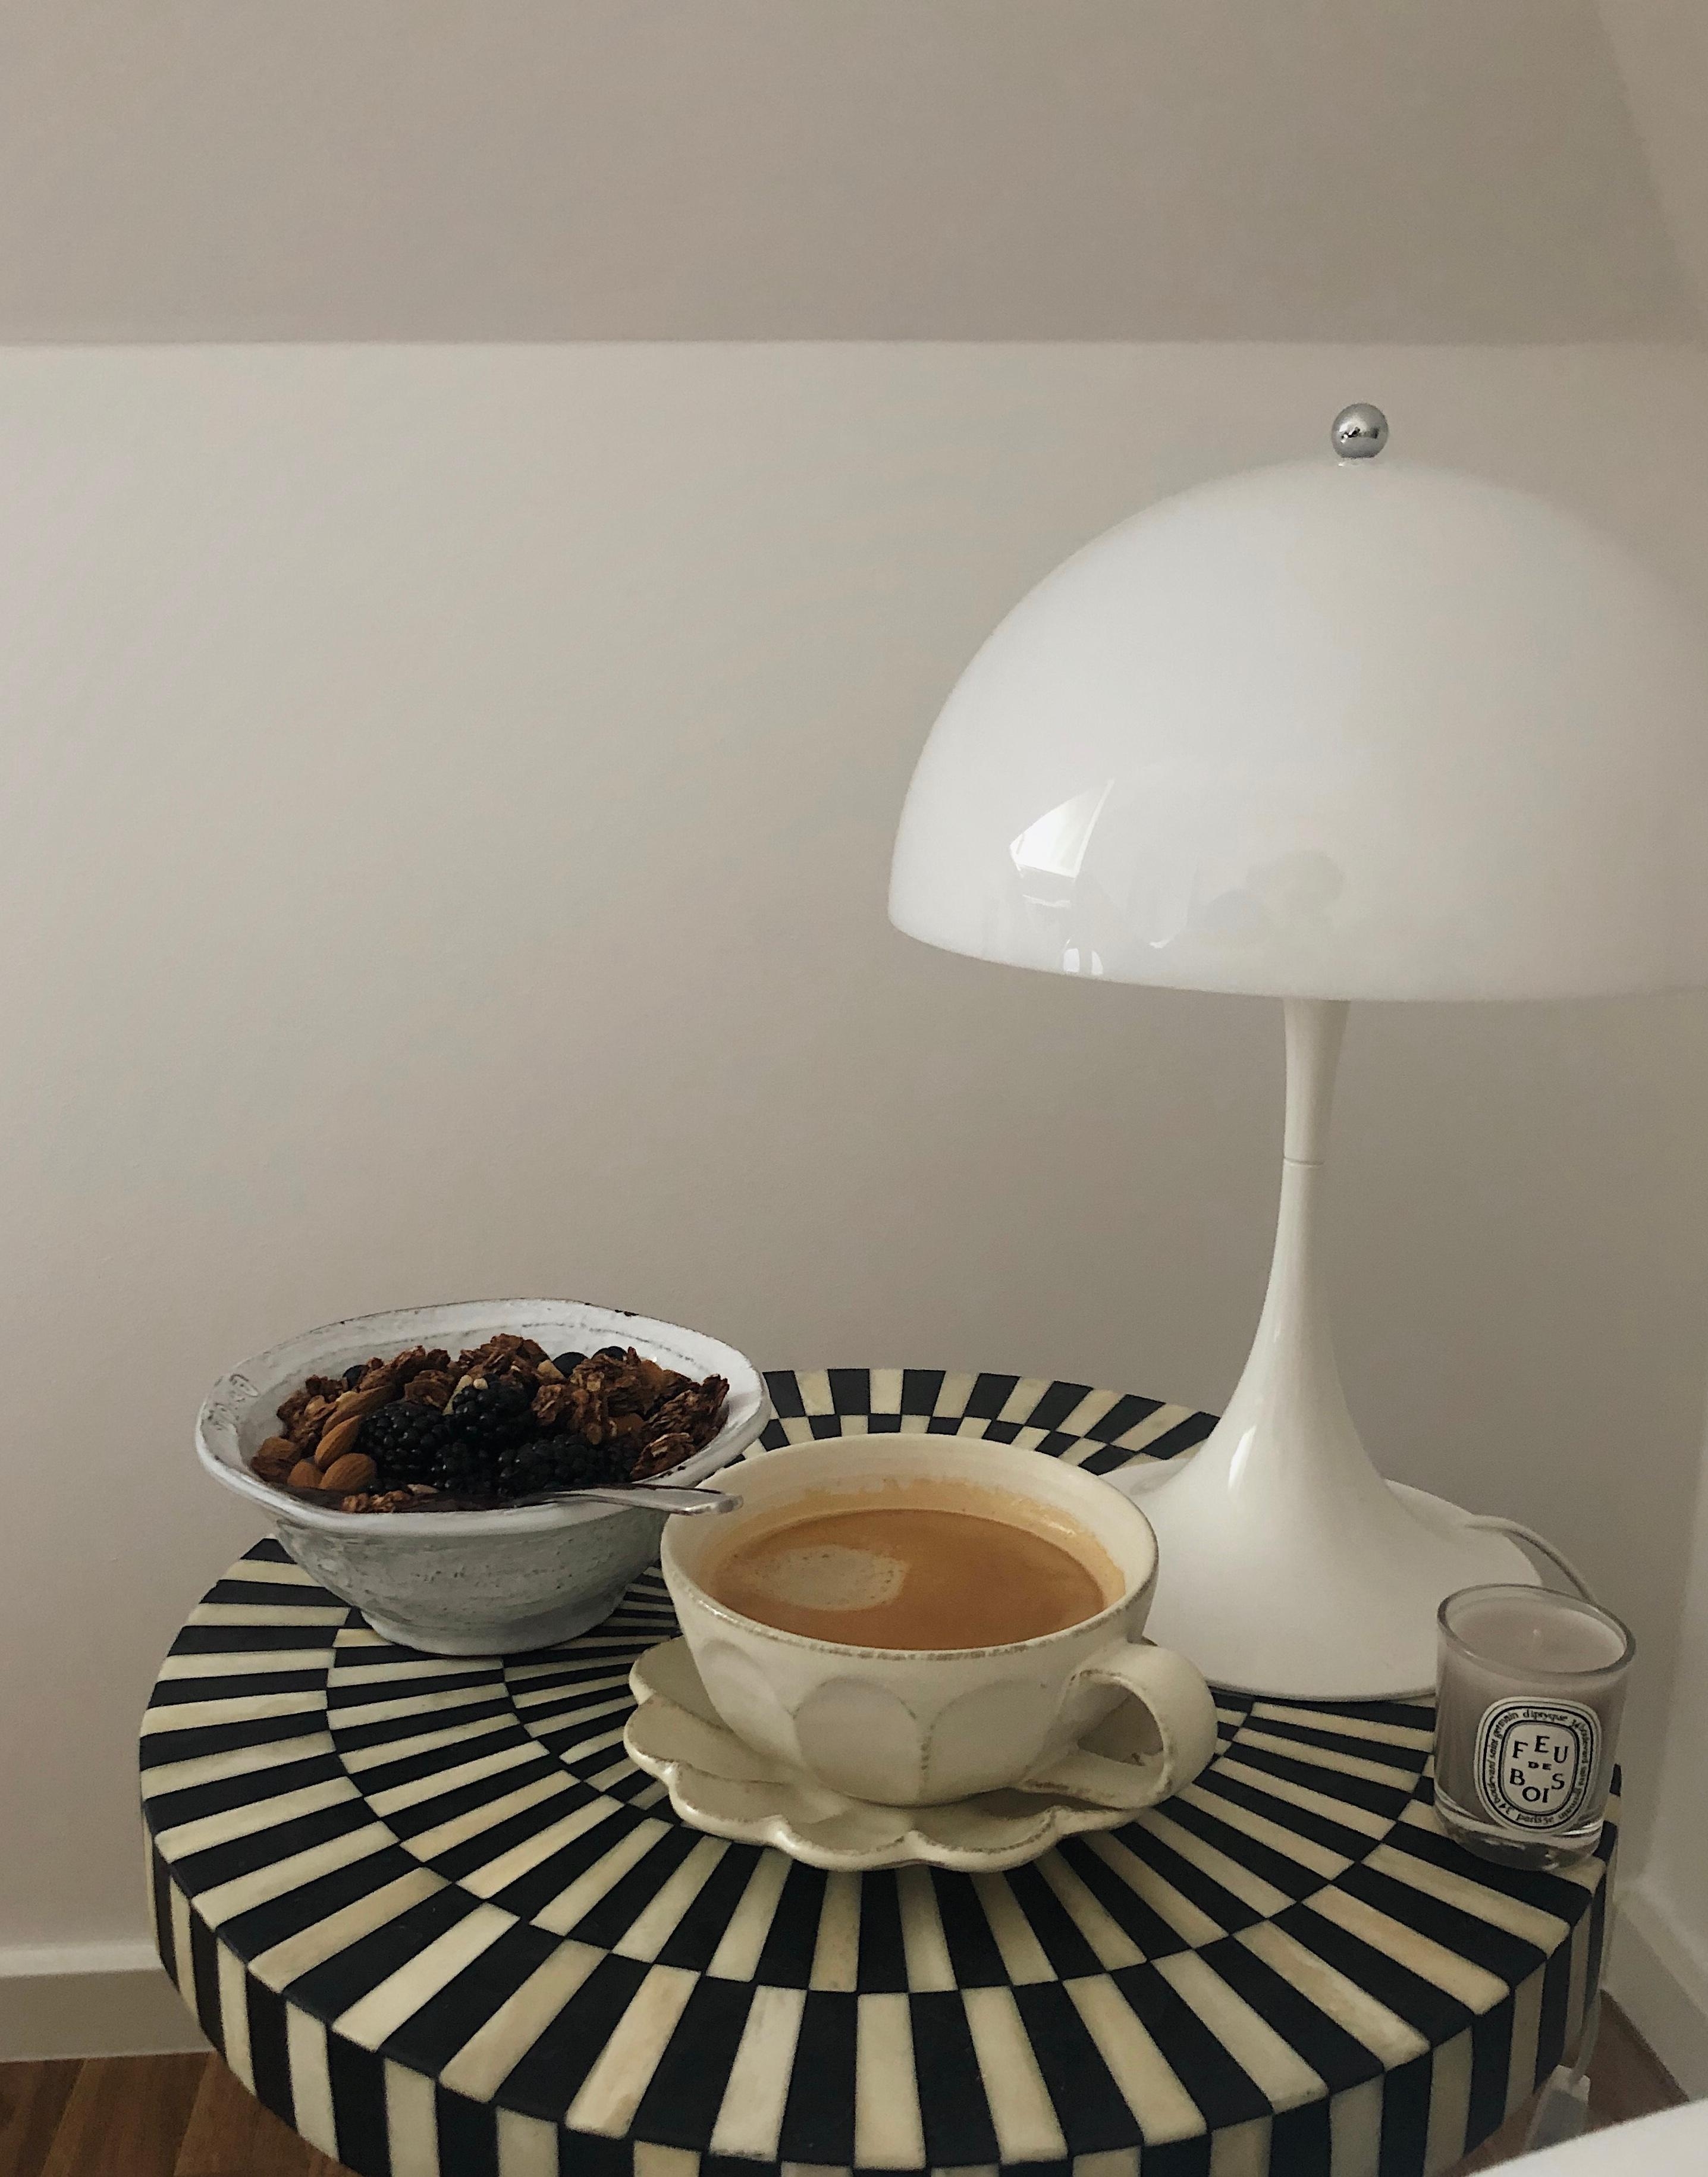 Things I like ☕️
#coffeeinbed #breakfast #gumo #couchstyle #midcentury #coffeedaily #panthella#louispoulsen #diptique 